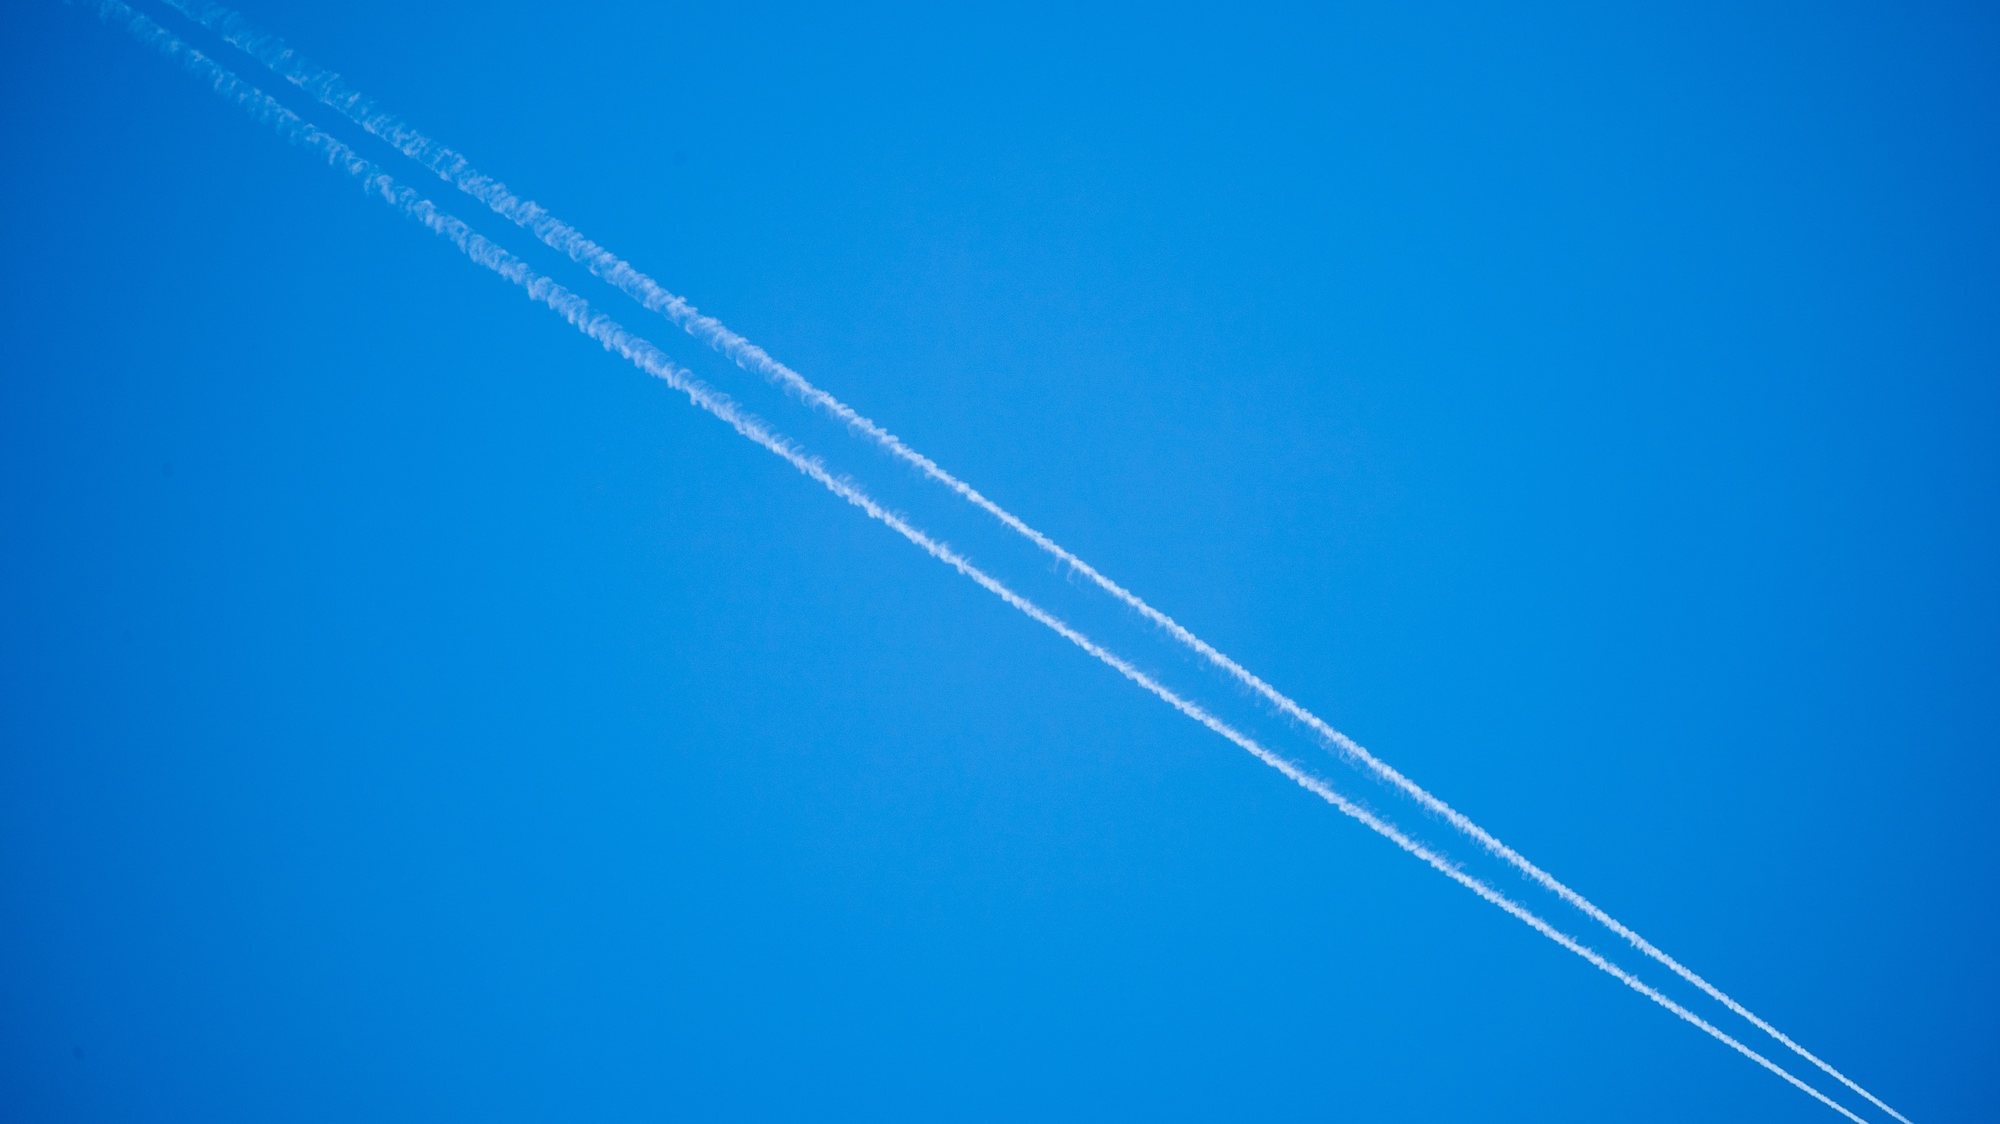 epa09789324 A plane leaves vapor trails in the blue sky as it flies over Frankfurt, Germany, 27 February 2022 (illustration with unidentified plane). Germany, along with other European states, imposed an airspace ban for Russian aircrafts with effect from 27 February 2022 as part of immediate sanctions against Russia following the invasion of Ukraine on 24 February.  EPA/CONSTANTN ZINN